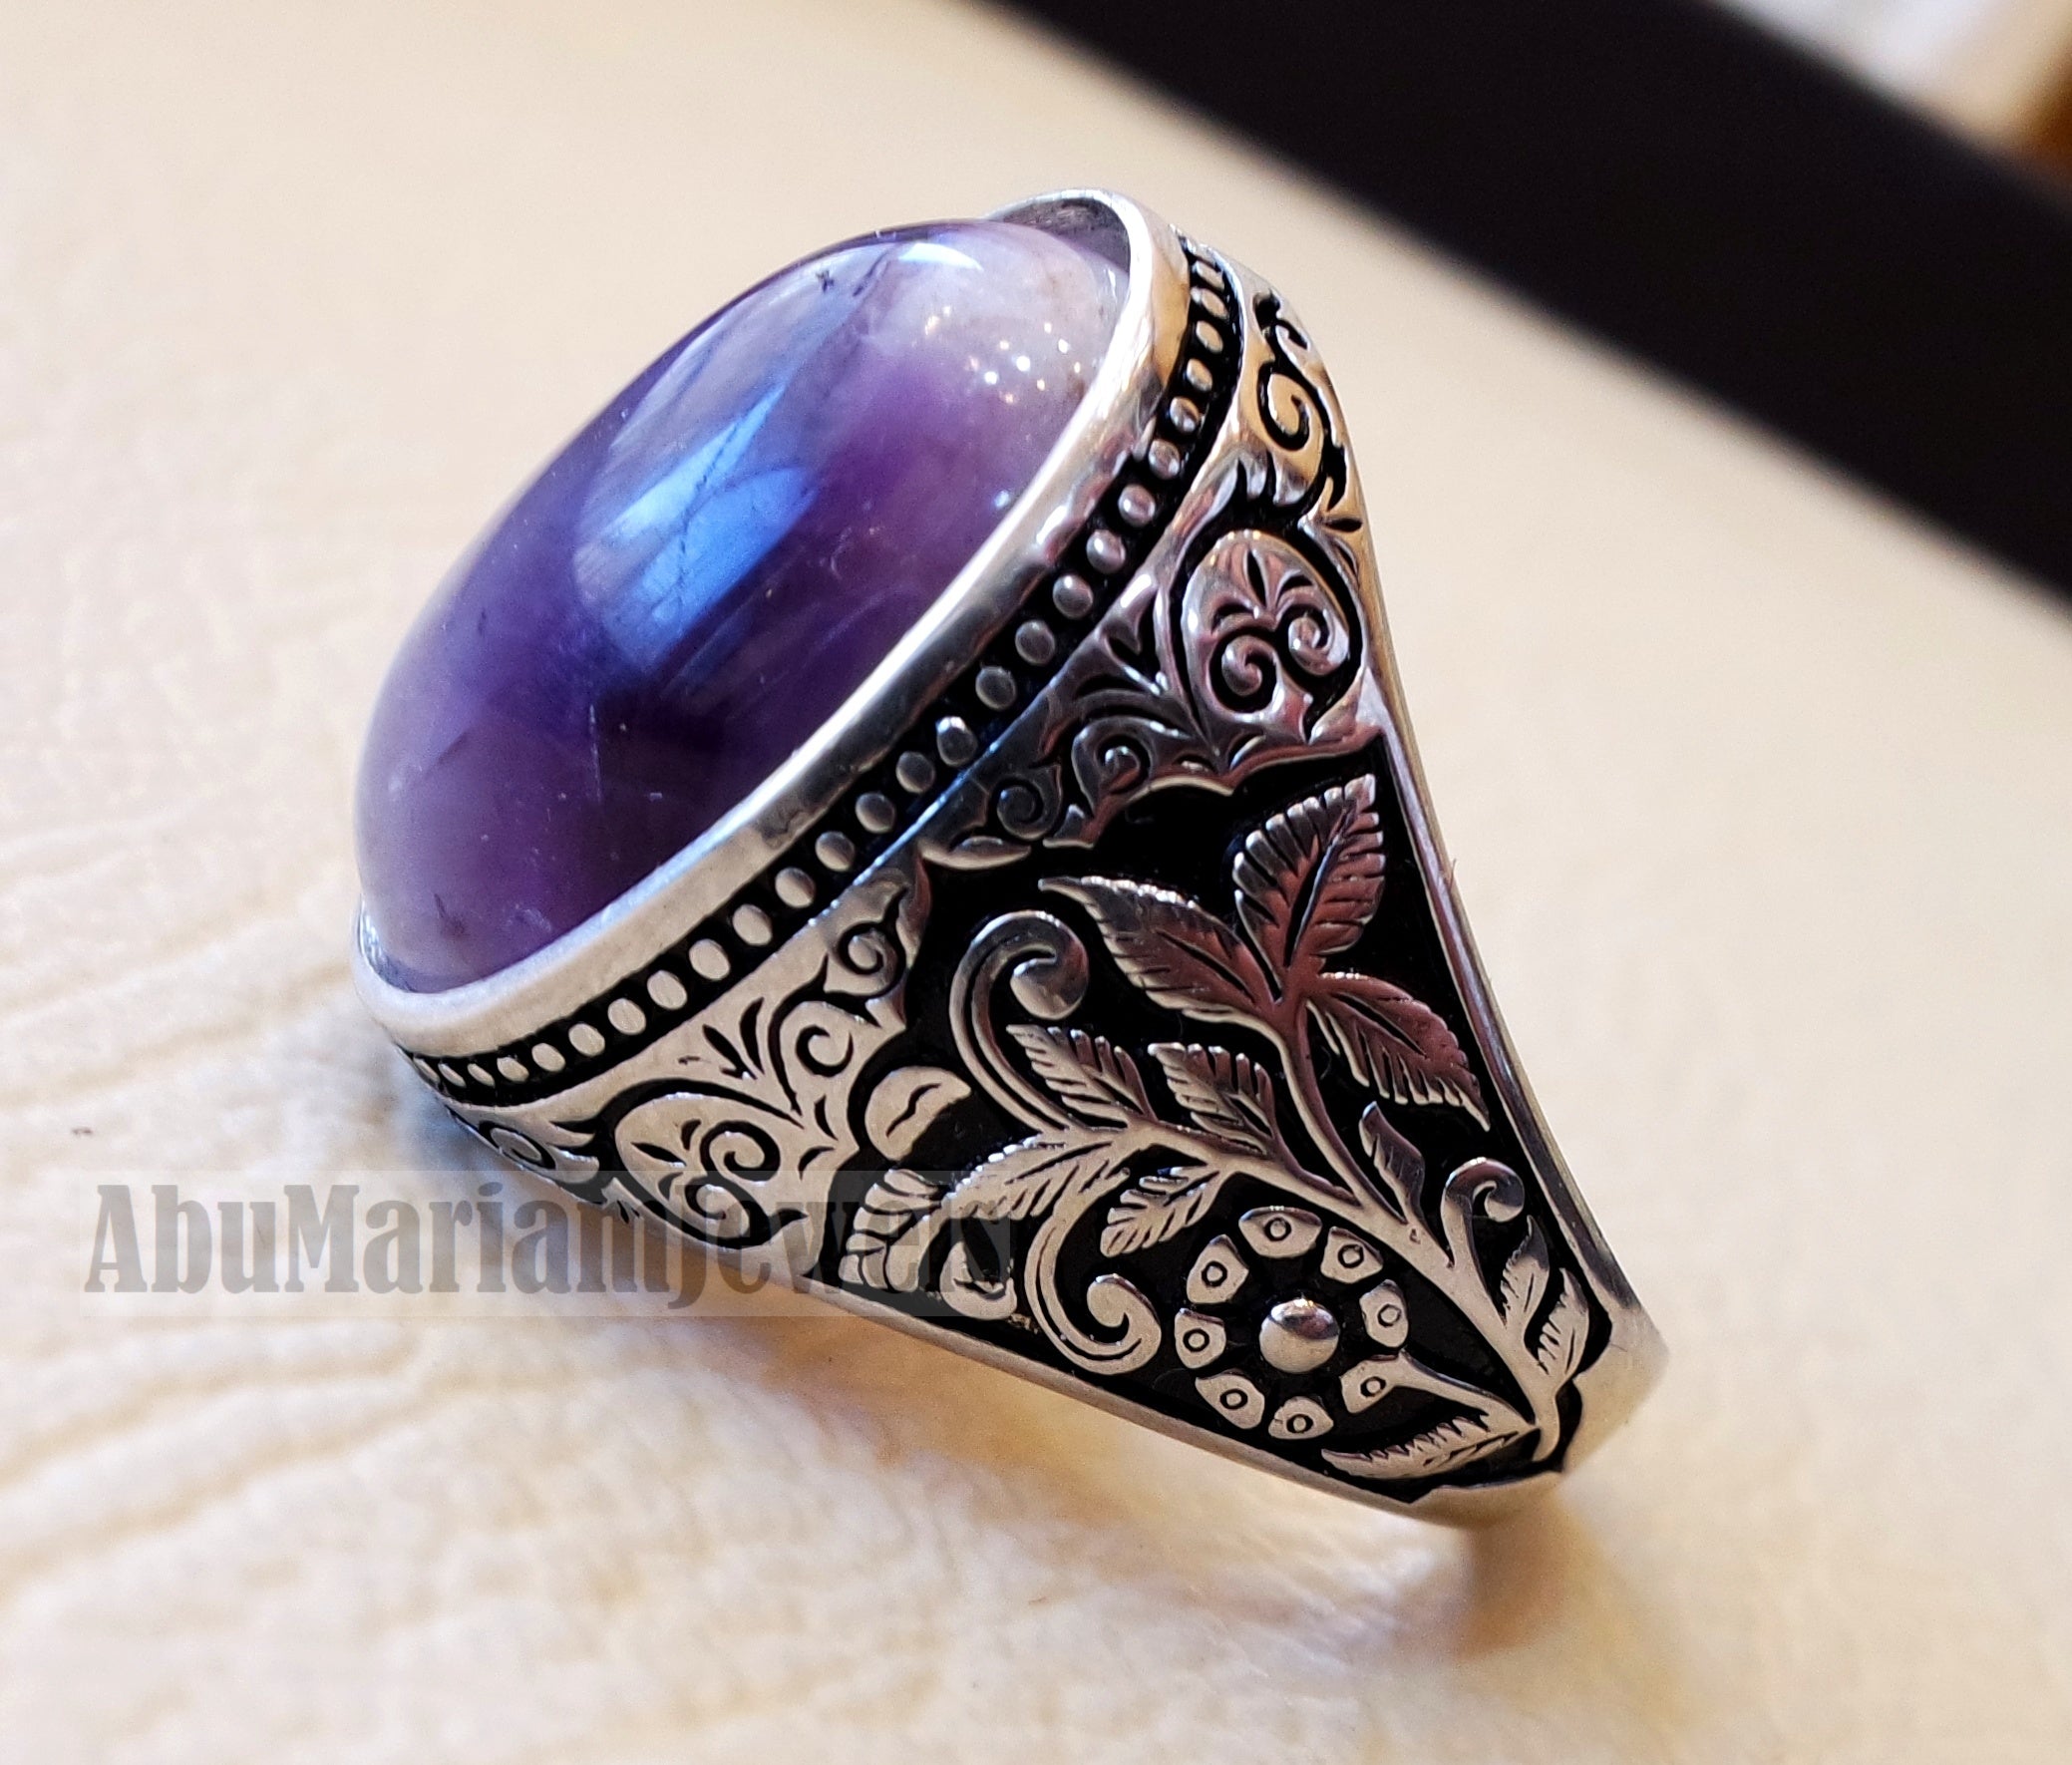 Amethyst agate natural purple stone sterling silver 925 man ring flowers nature ornaments style jewelry oval gem all sizes express shipping